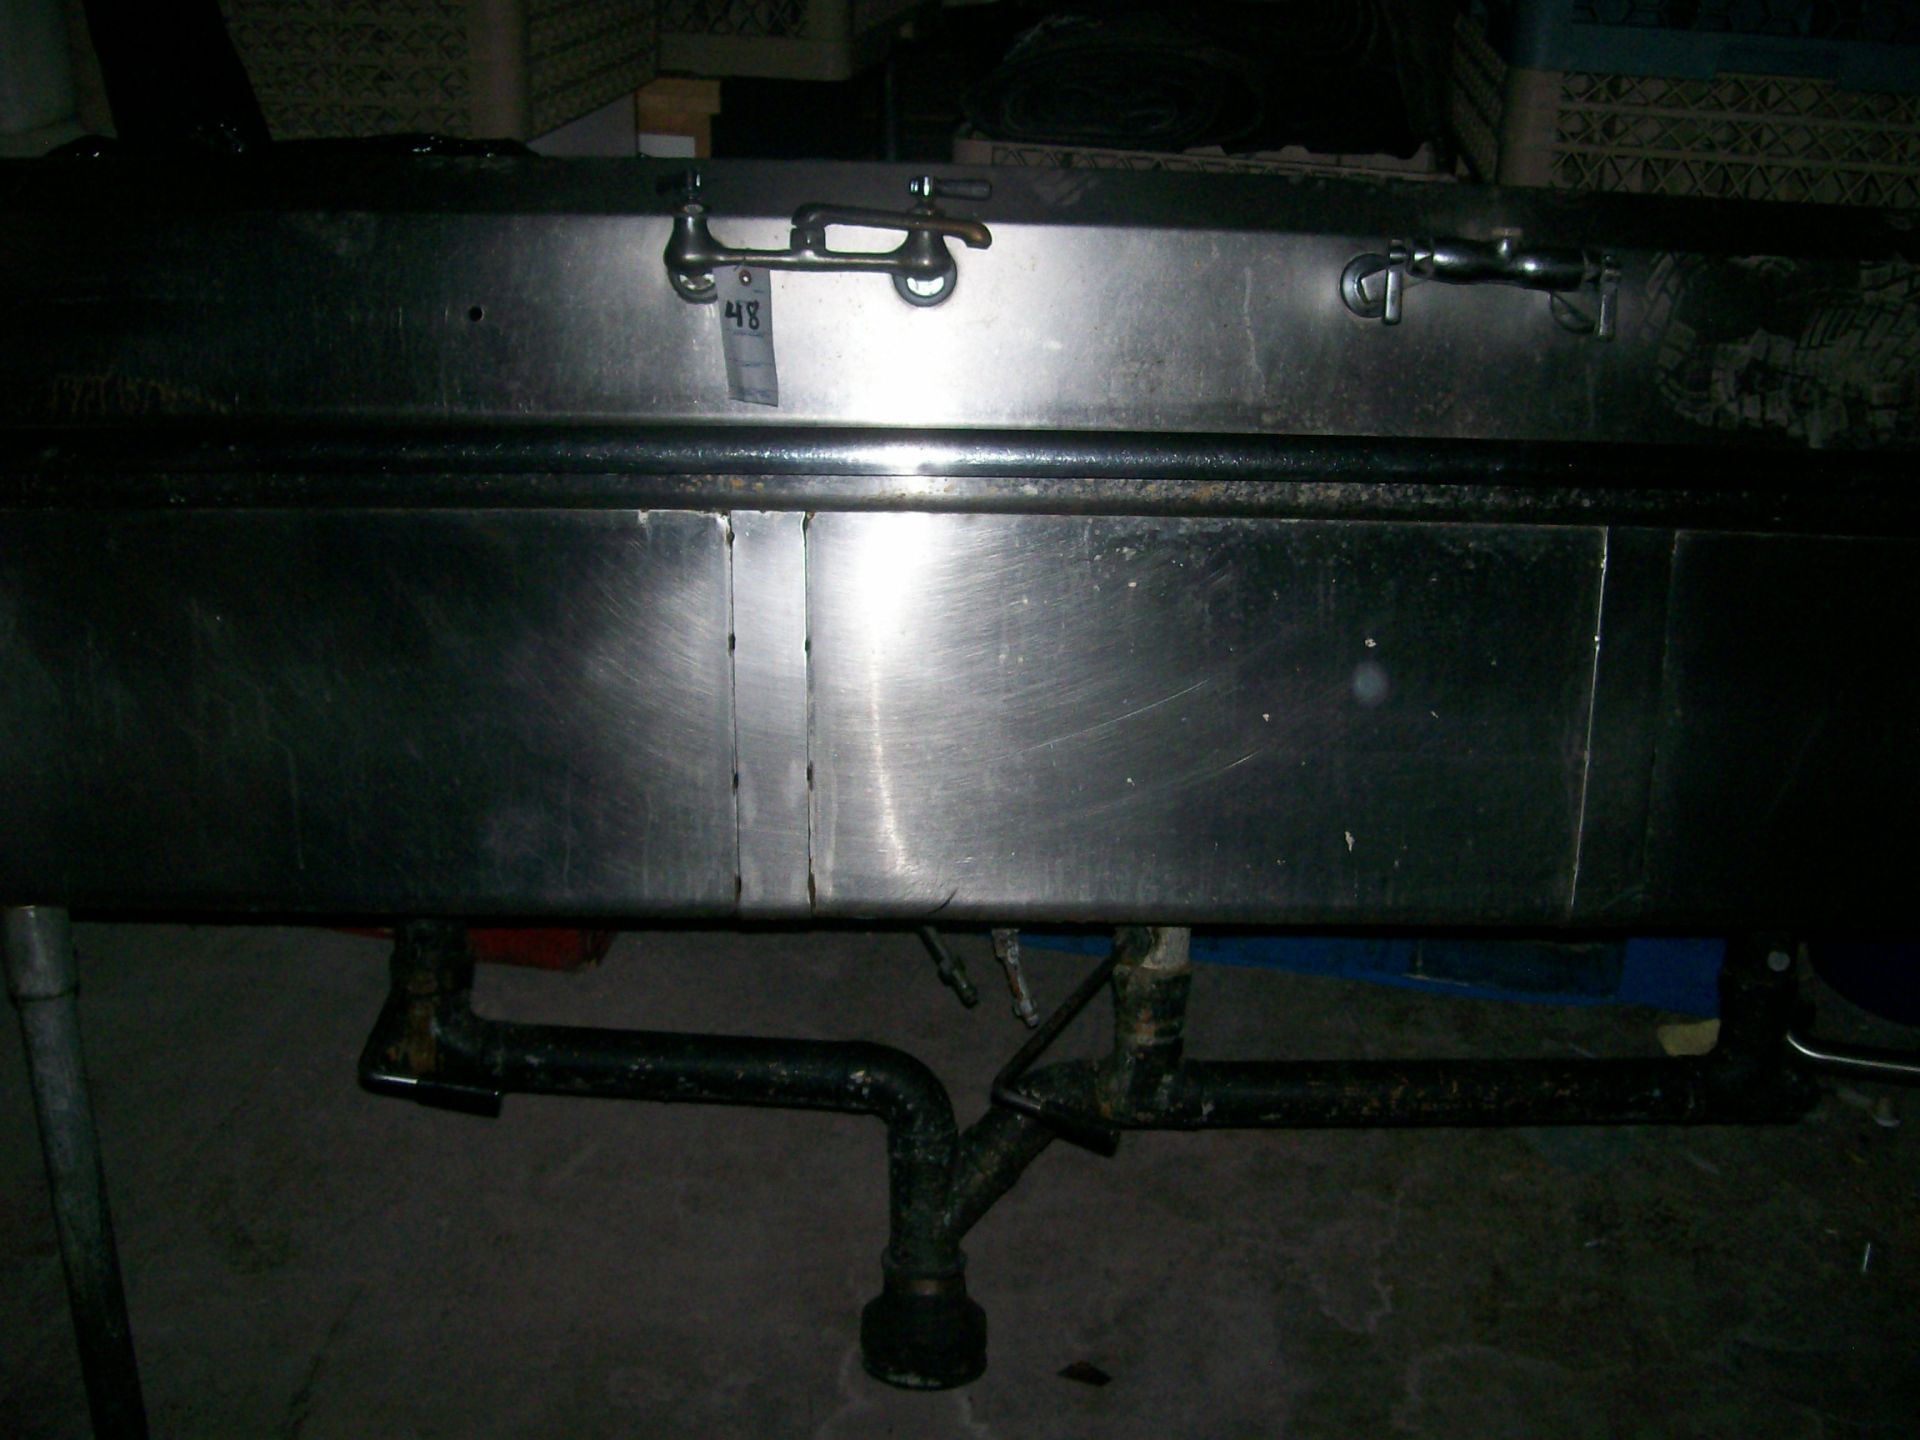 3-COMPARTMENT SINK W/SPRAYER & 2 FAUCETS) 115"